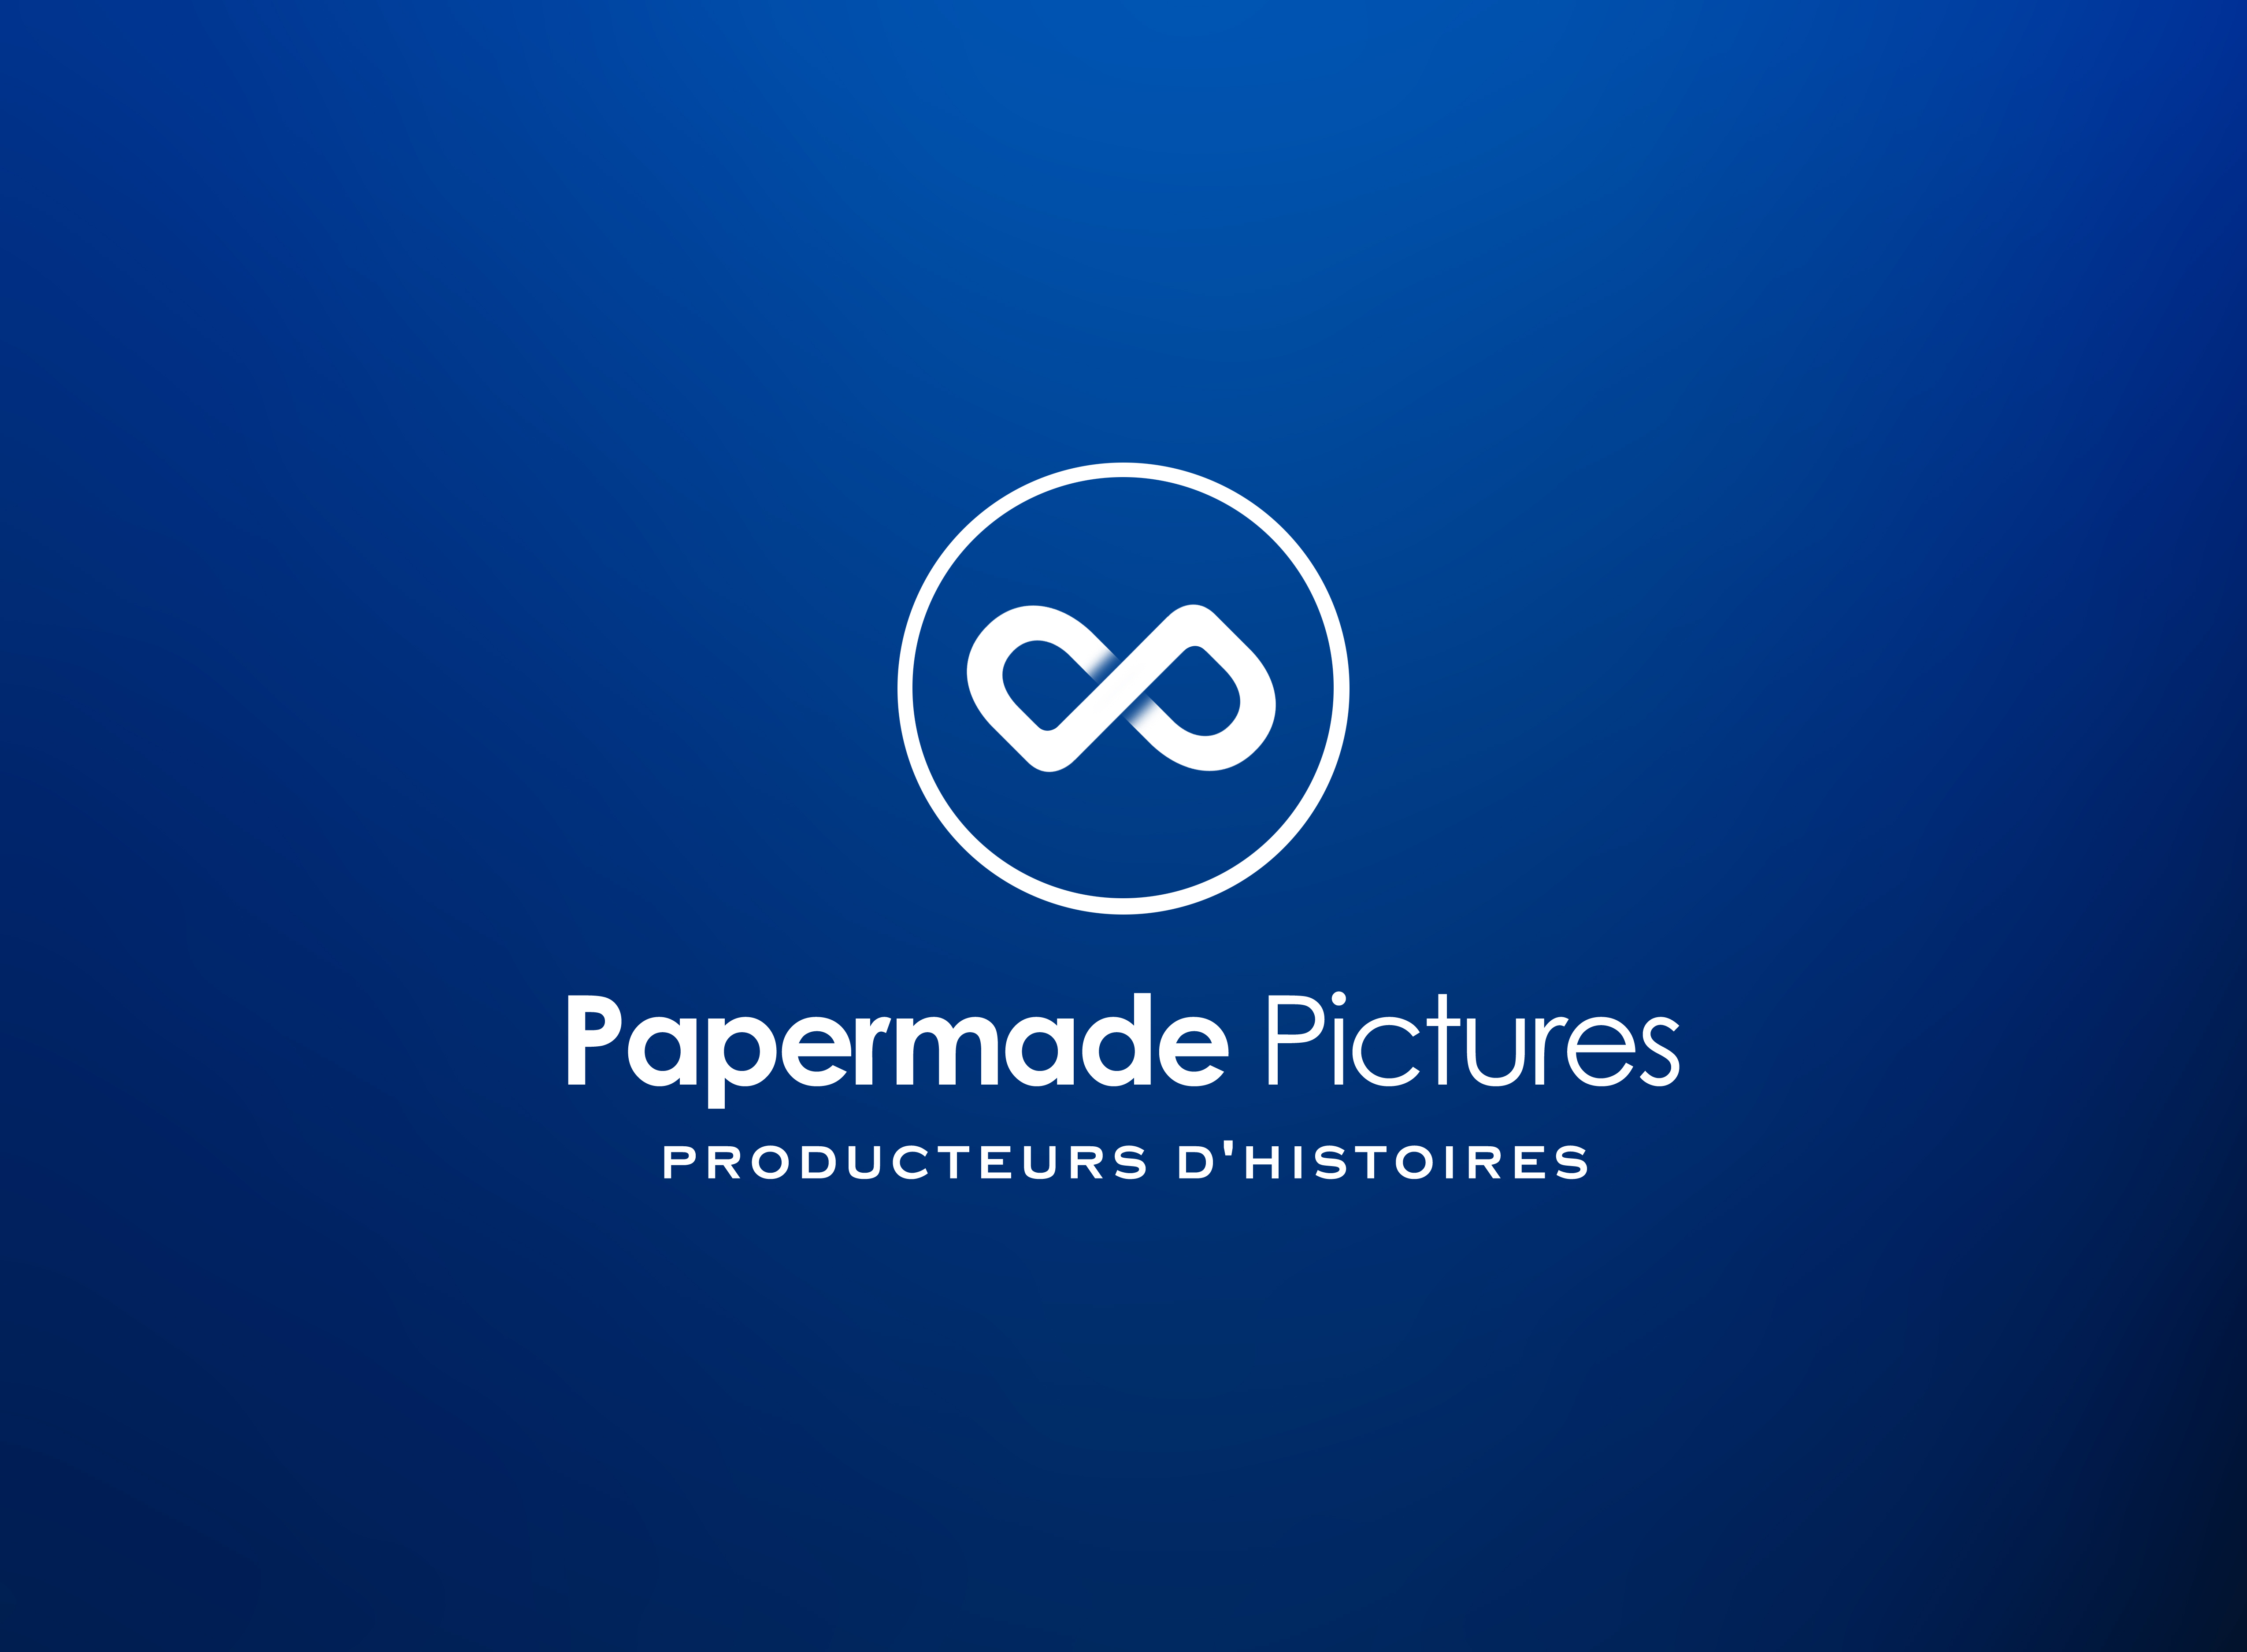 PAPERMADE PICTURES